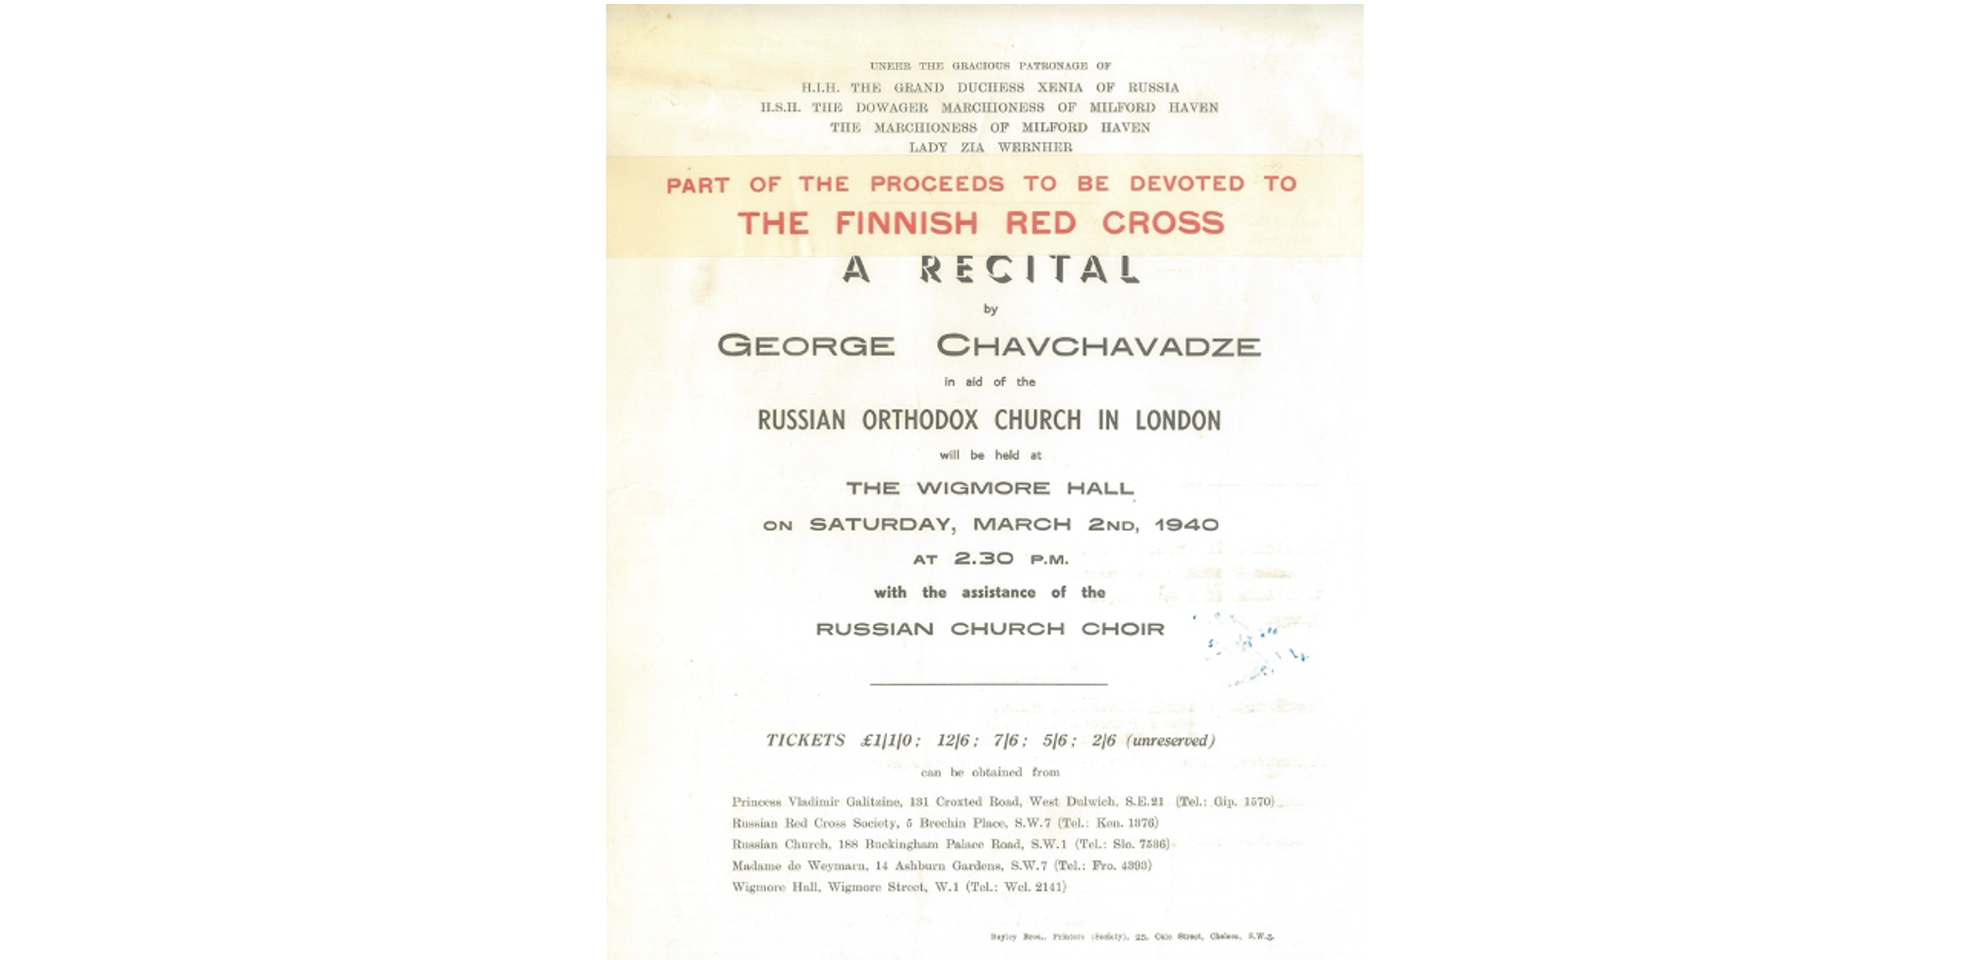 A flyer announcing a recital by George Chavchavadze at Wigmore Hall, London, on 2nd March 1940; text in red says proceeds of the concert go to the Finnish Red Cross.